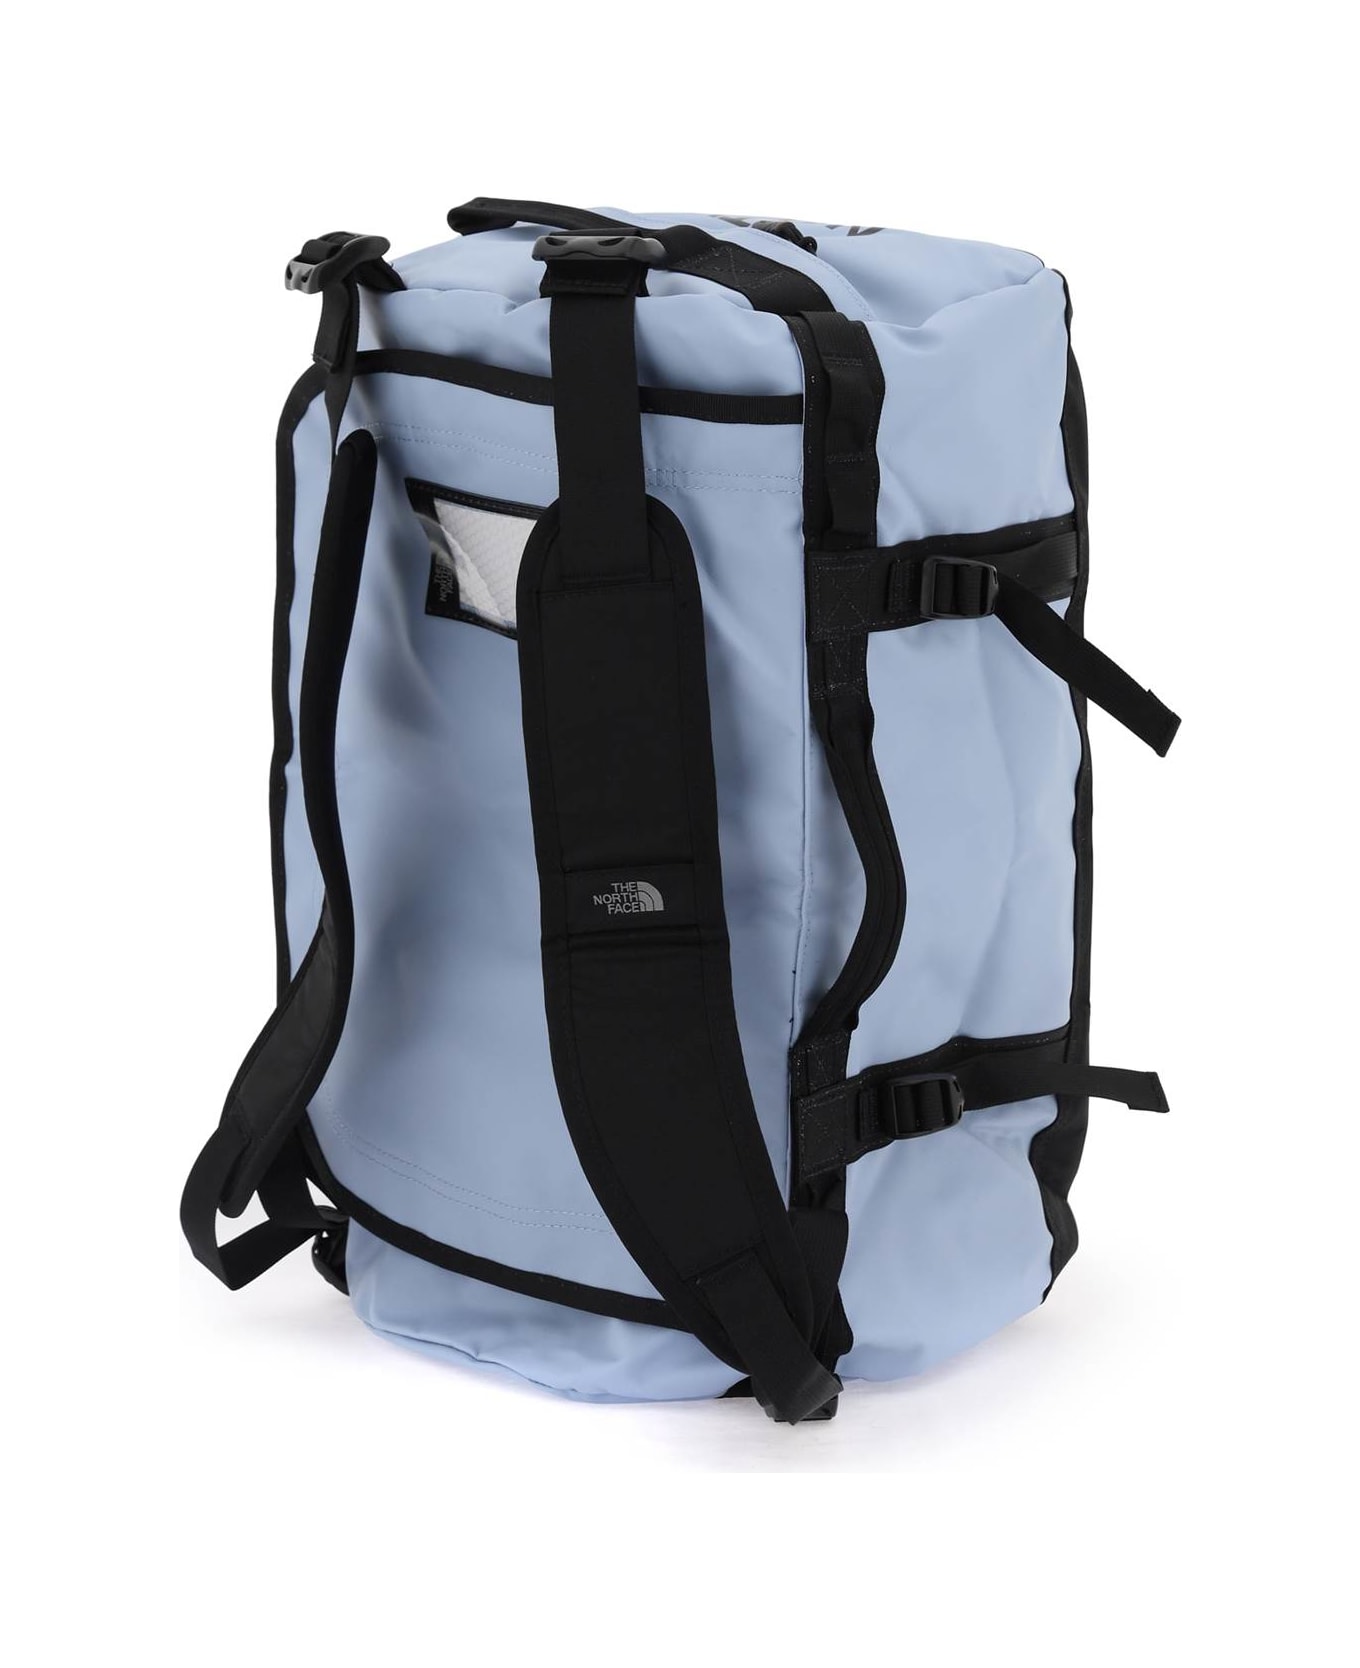 The North Face Small Base Camp Duffel Bag - STEEL BLUE TNF BLACK (Light blue) トラベルバッグ